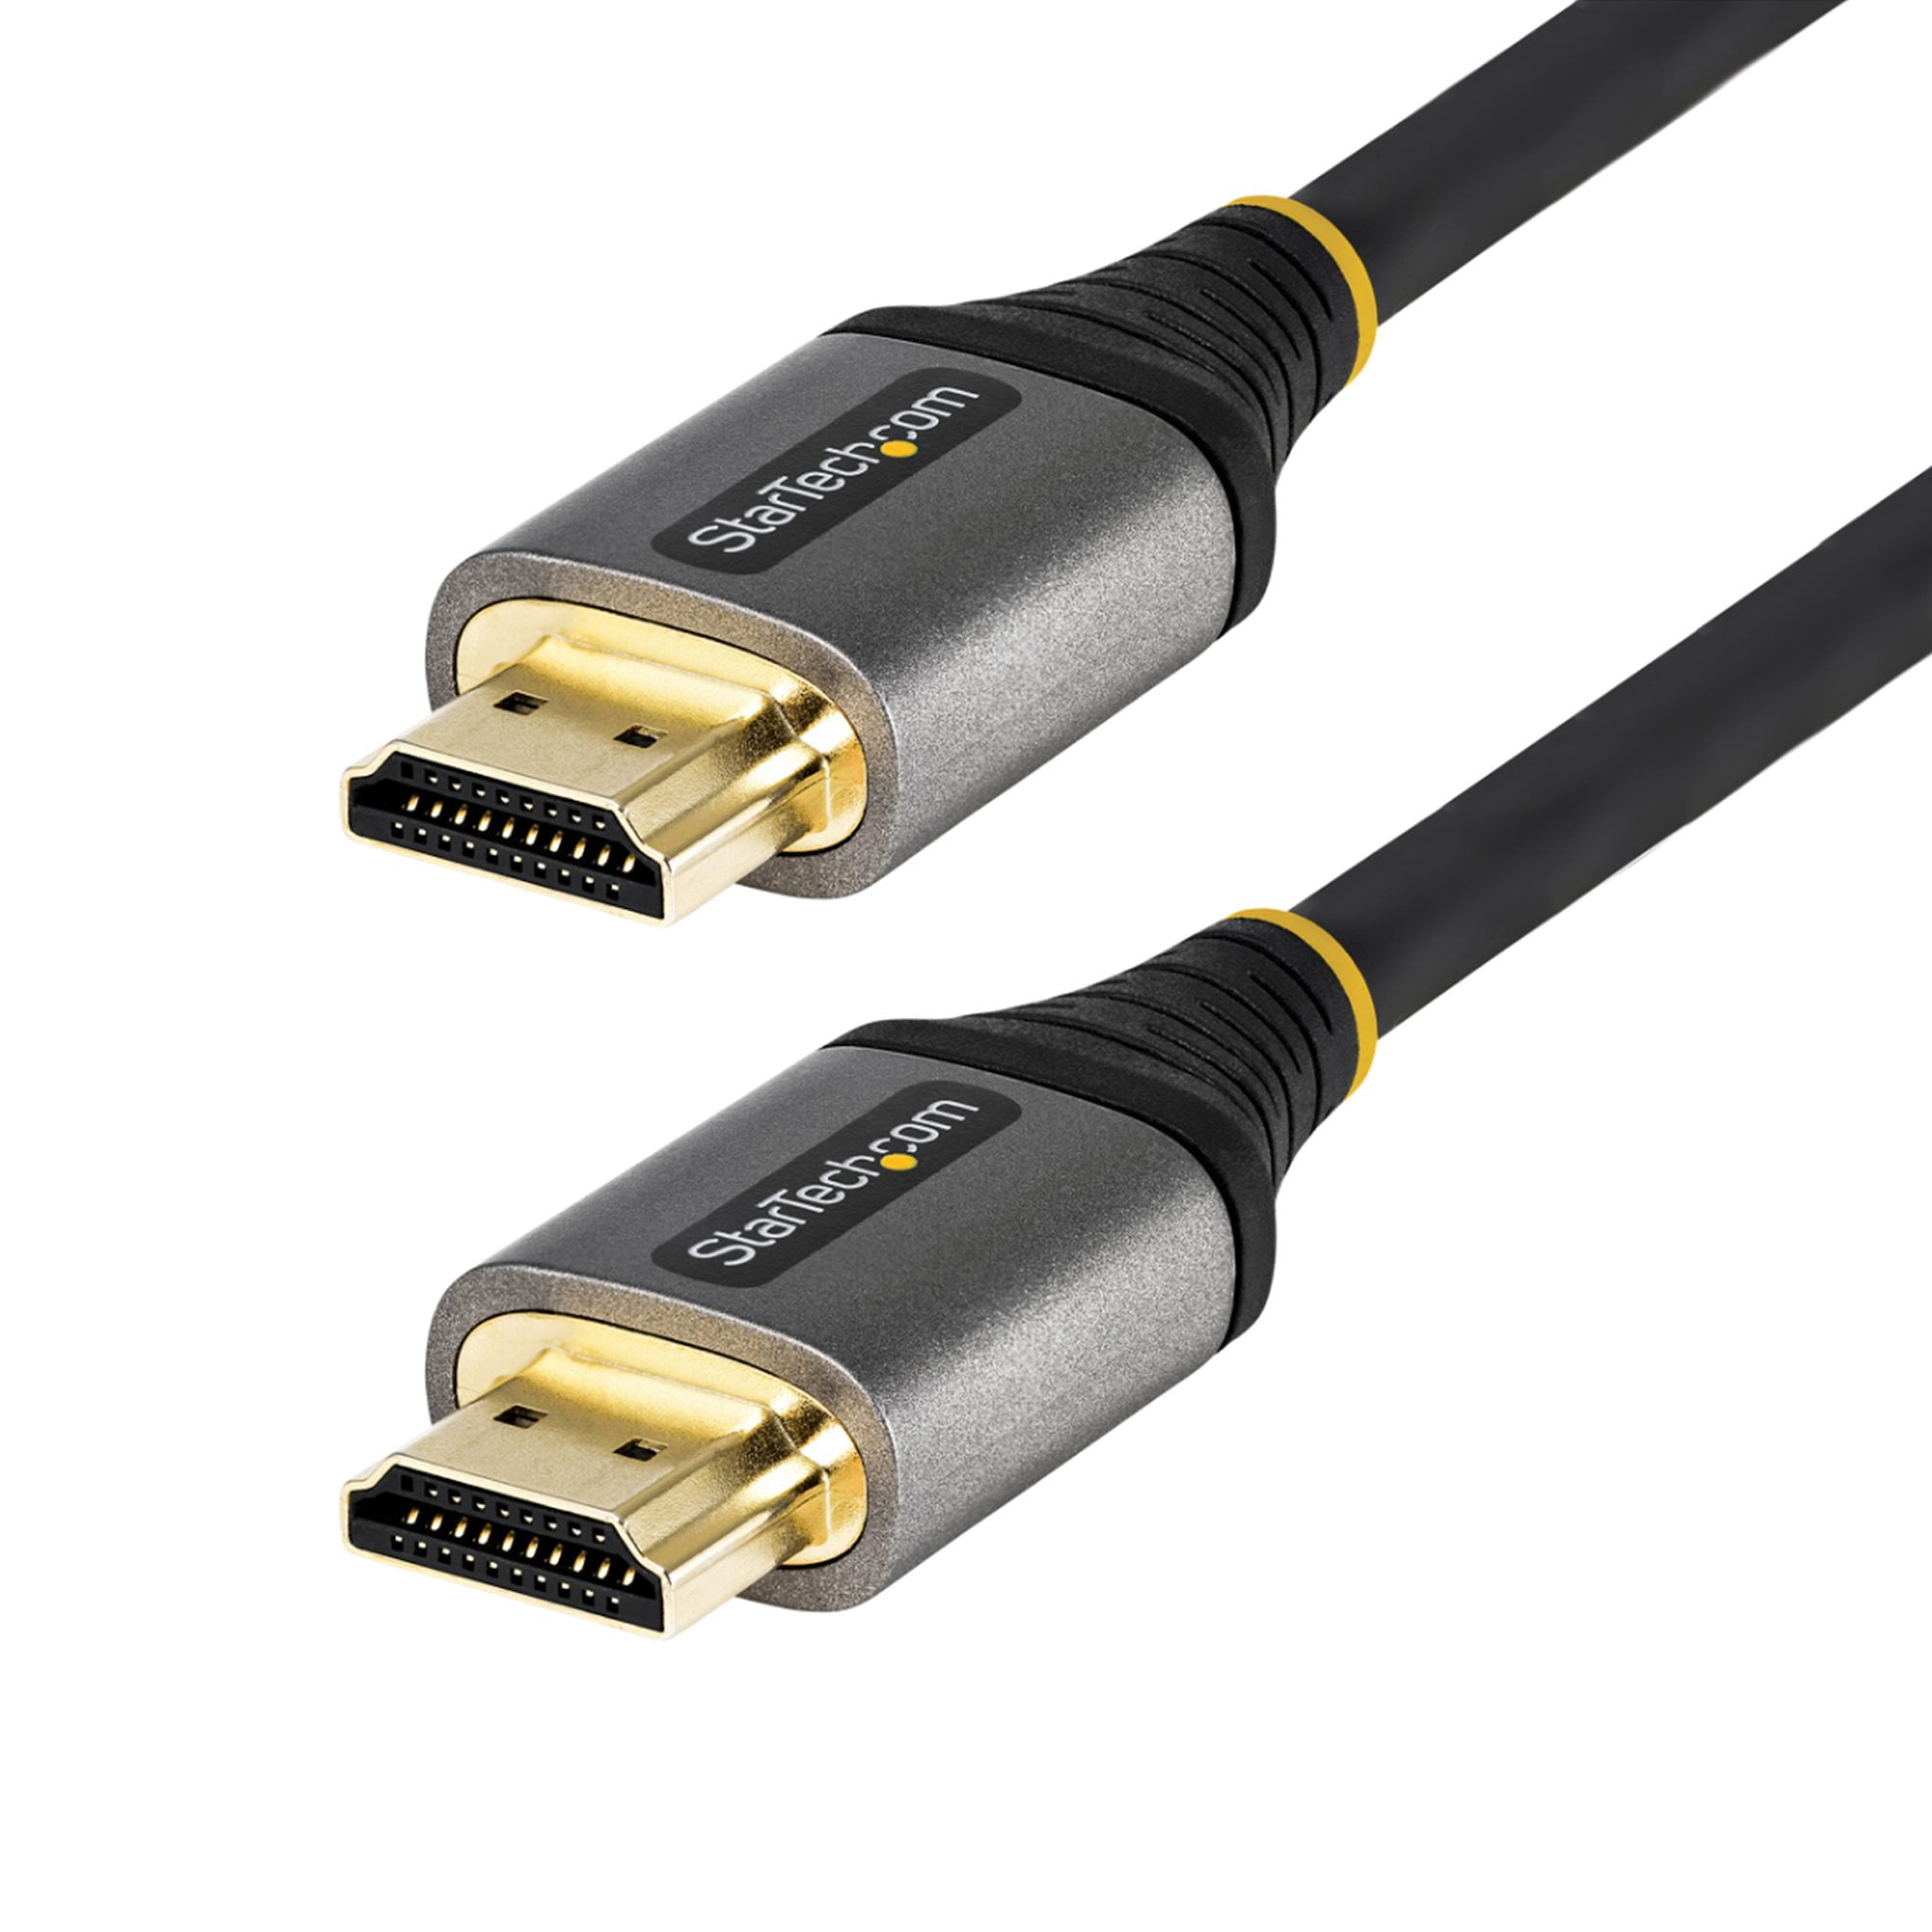 High-Speed HDMI Cable 1M/3FT,Highwings 4K High Speed 18Gbps HDMI 2.0 Braided HDMI Cord 30AWG 4K@60Hz Compatible 4K HDR,HDCP 2.2,Video 4K UHD 2160p,HD 1080p,3D Xbox PlayStation PS3 PS4 PC Blu-ray ect 